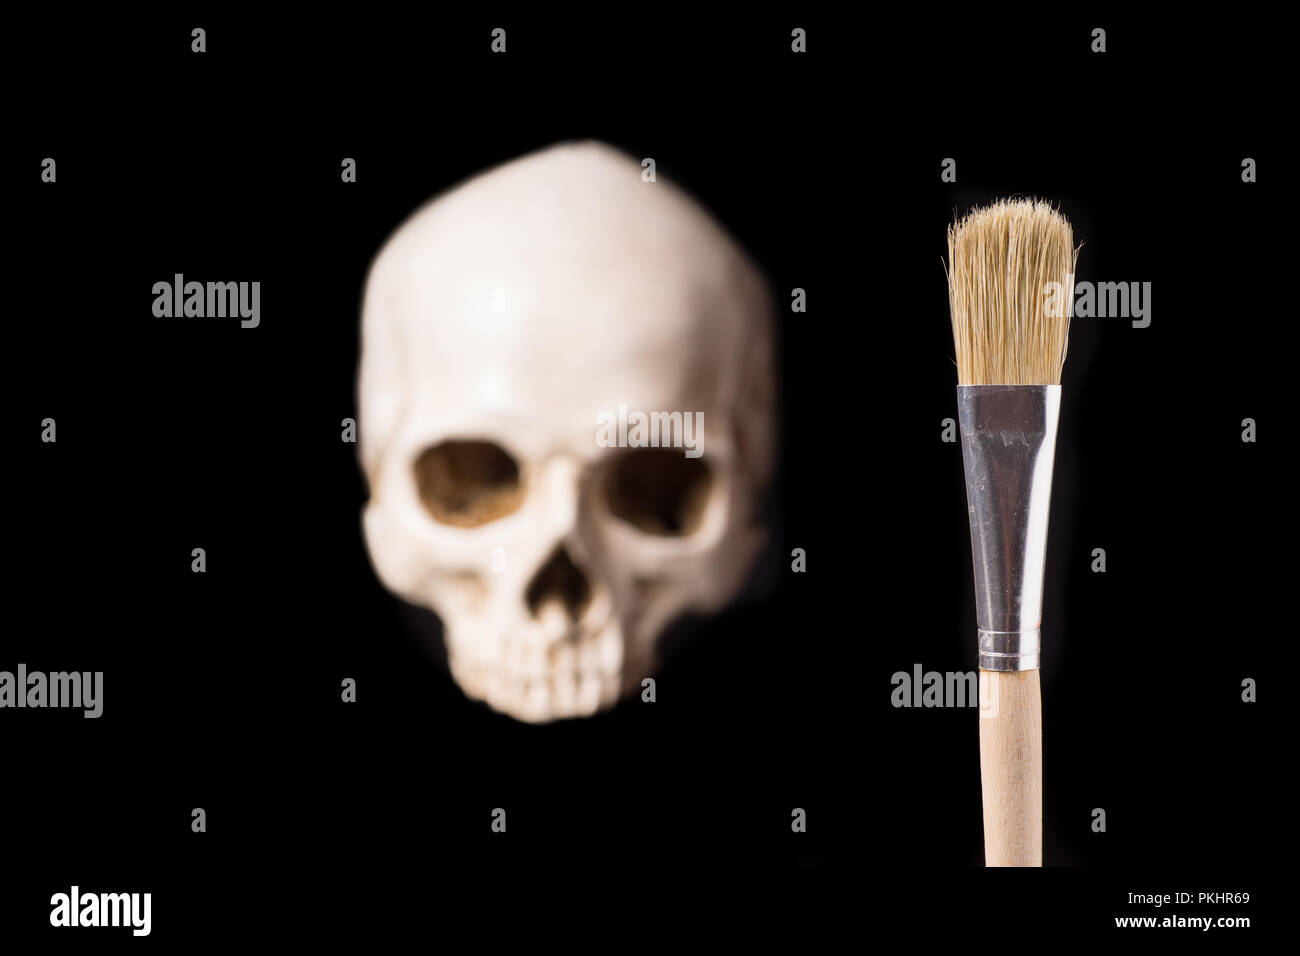 Skull and brush isolated on black background with copyspace Stock Photo